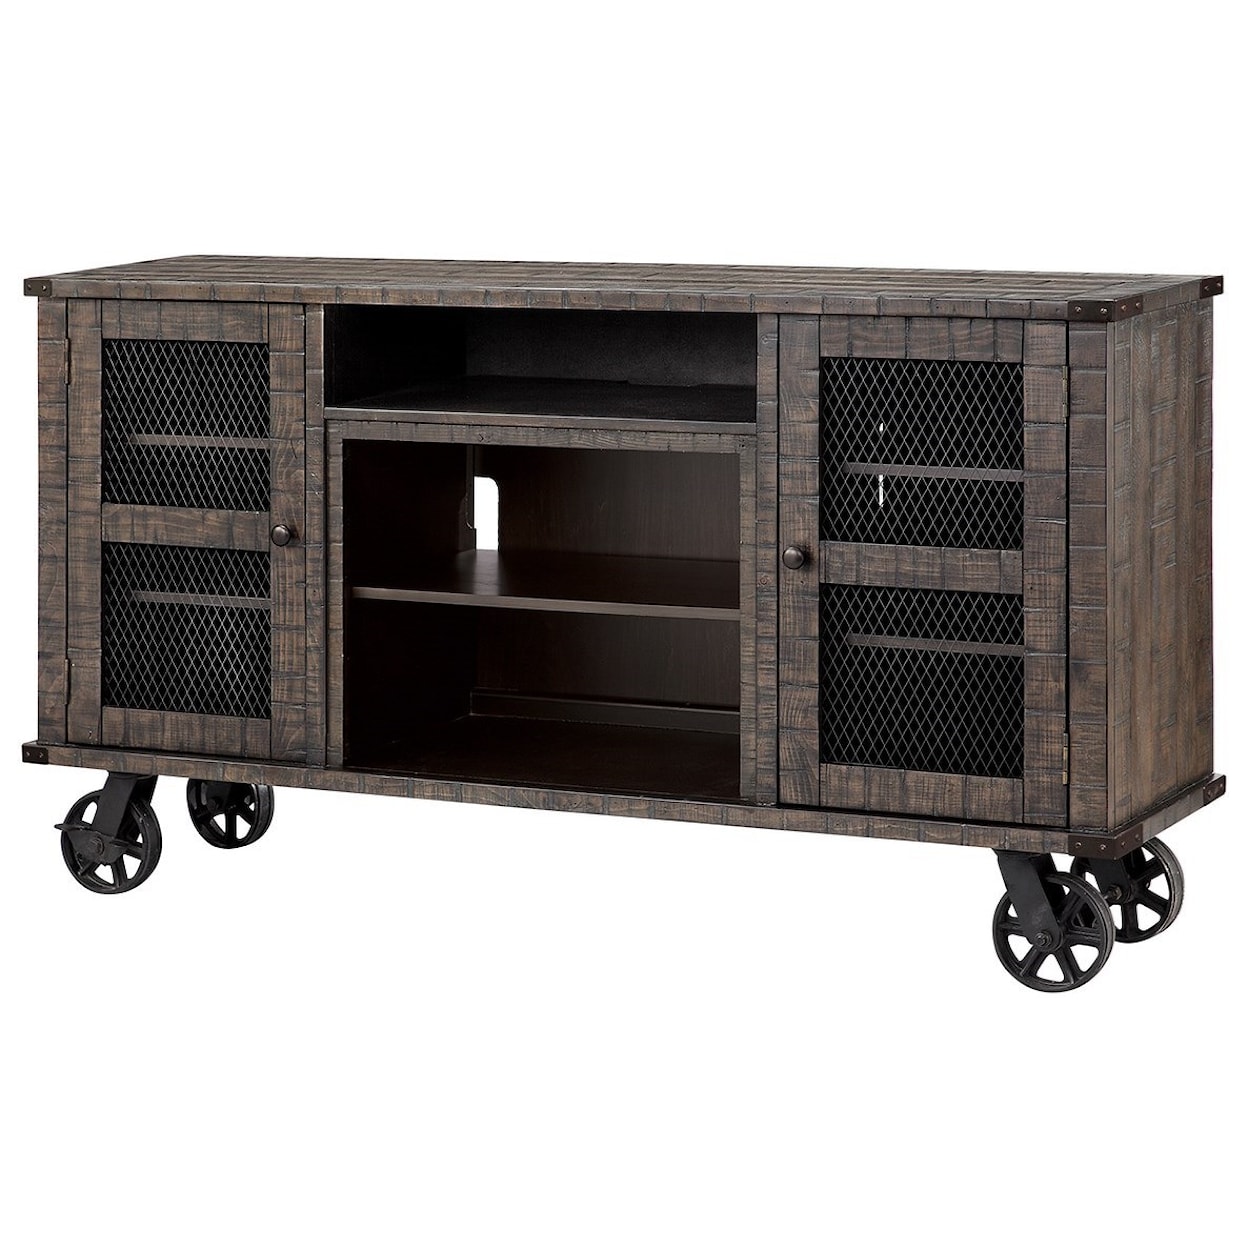 Dimplex Duncan Dimplex Fireplace Media Console with Locking Wheels